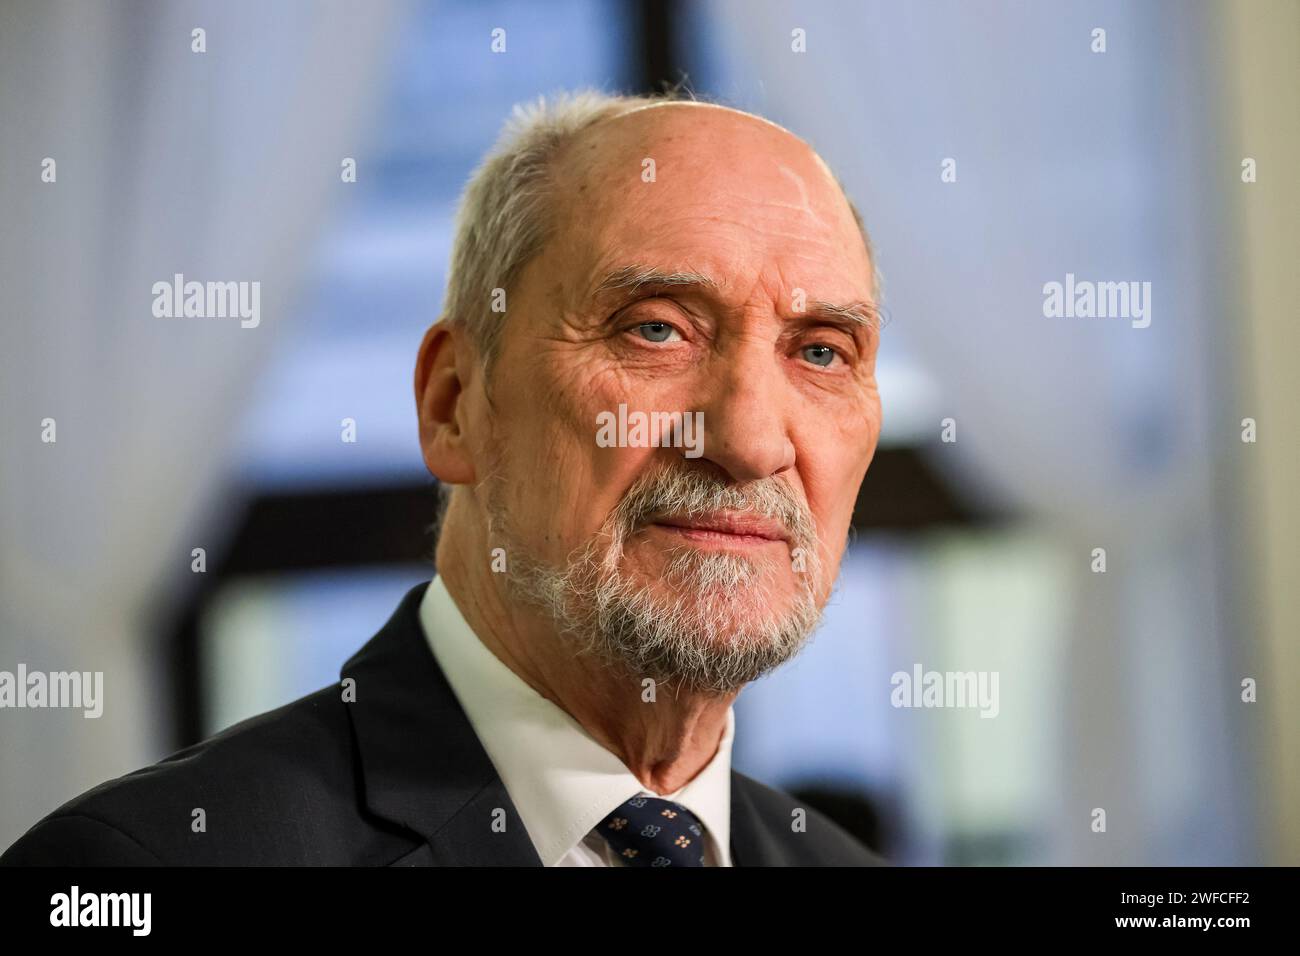 Antoni Macierewicz, former Minister of Defence of Poland talks to the press during the 4th session of Polish Parliament that takes place amid chaos created by legal disagreement with the previous government. The current government took over power in Poland on December 13, 2023, taking over from the Law and Justice far-right political party, which has ruled for 8 years. Both sides accuse each other of unconstitutional acts, and two de facto legal systems are present in the country. (Photo by Dominika Zarzycka / SOPA Images/Sipa USA) Stock Photo